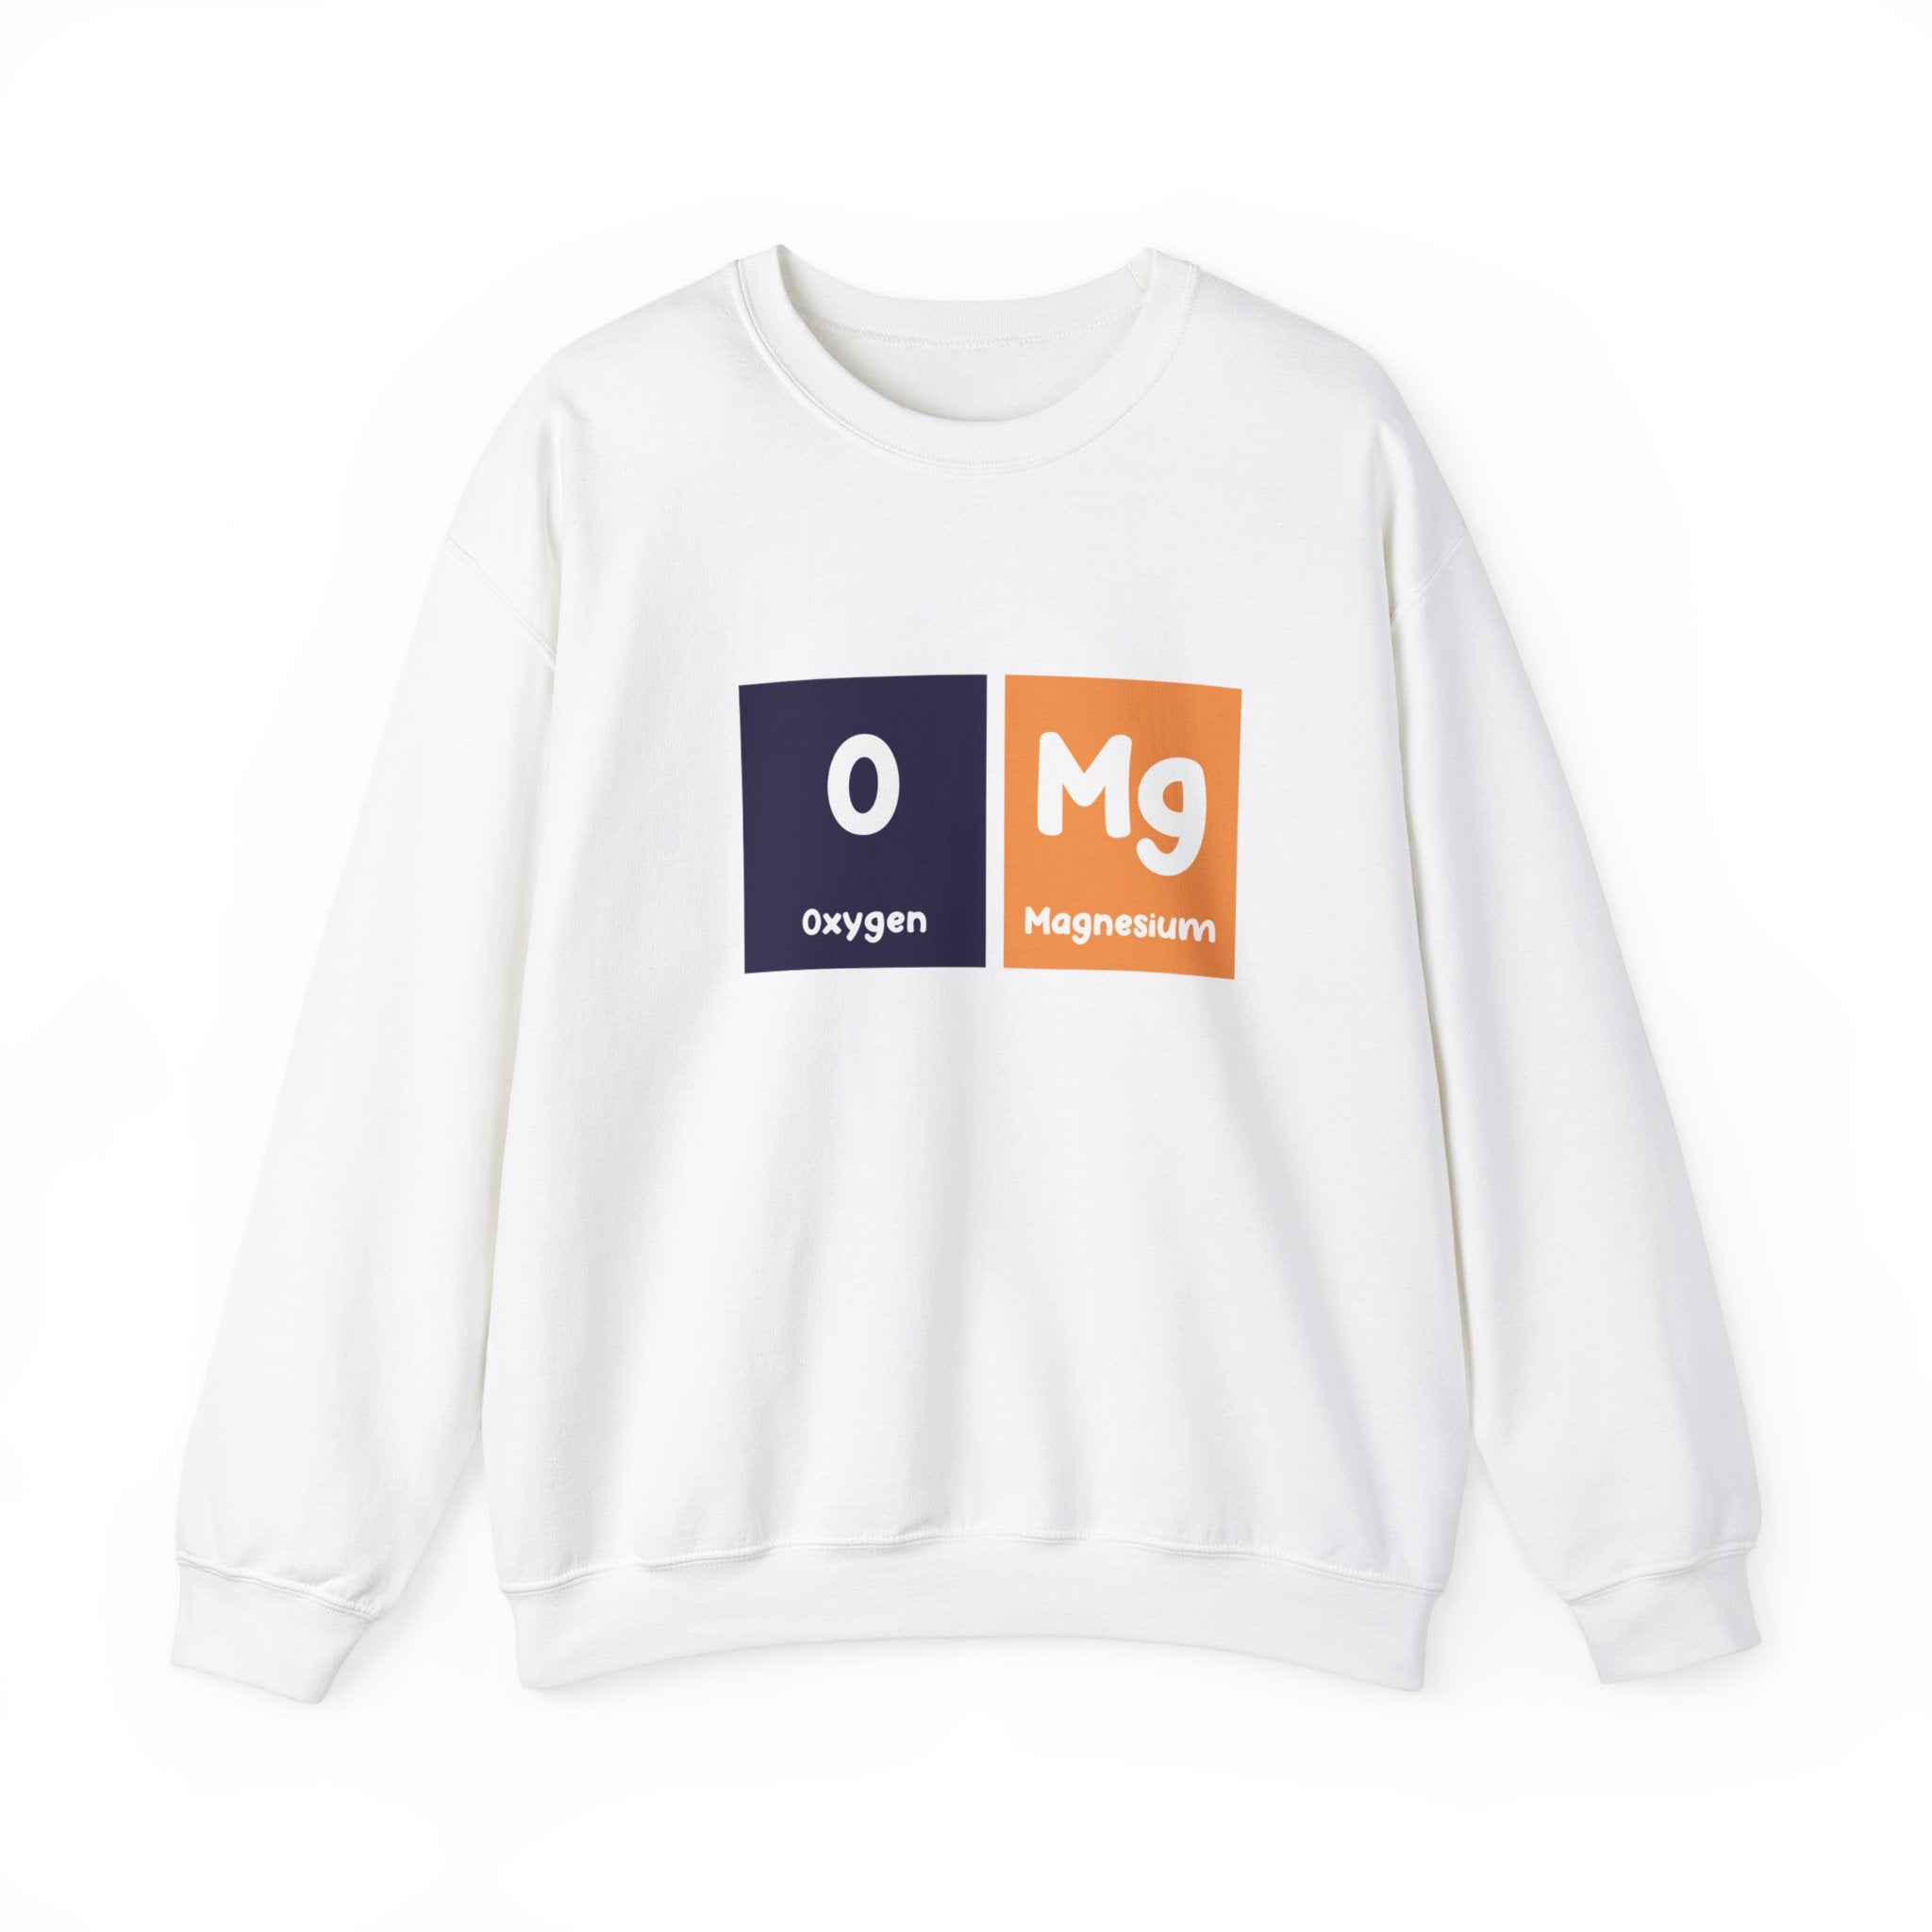 O-Mg - Sweatshirt perfect for the colder months, featuring periodic table elements Oxygen (O) and Magnesium (Mg) in two colored squares— "O" in a dark square and "Mg" in an orange square.